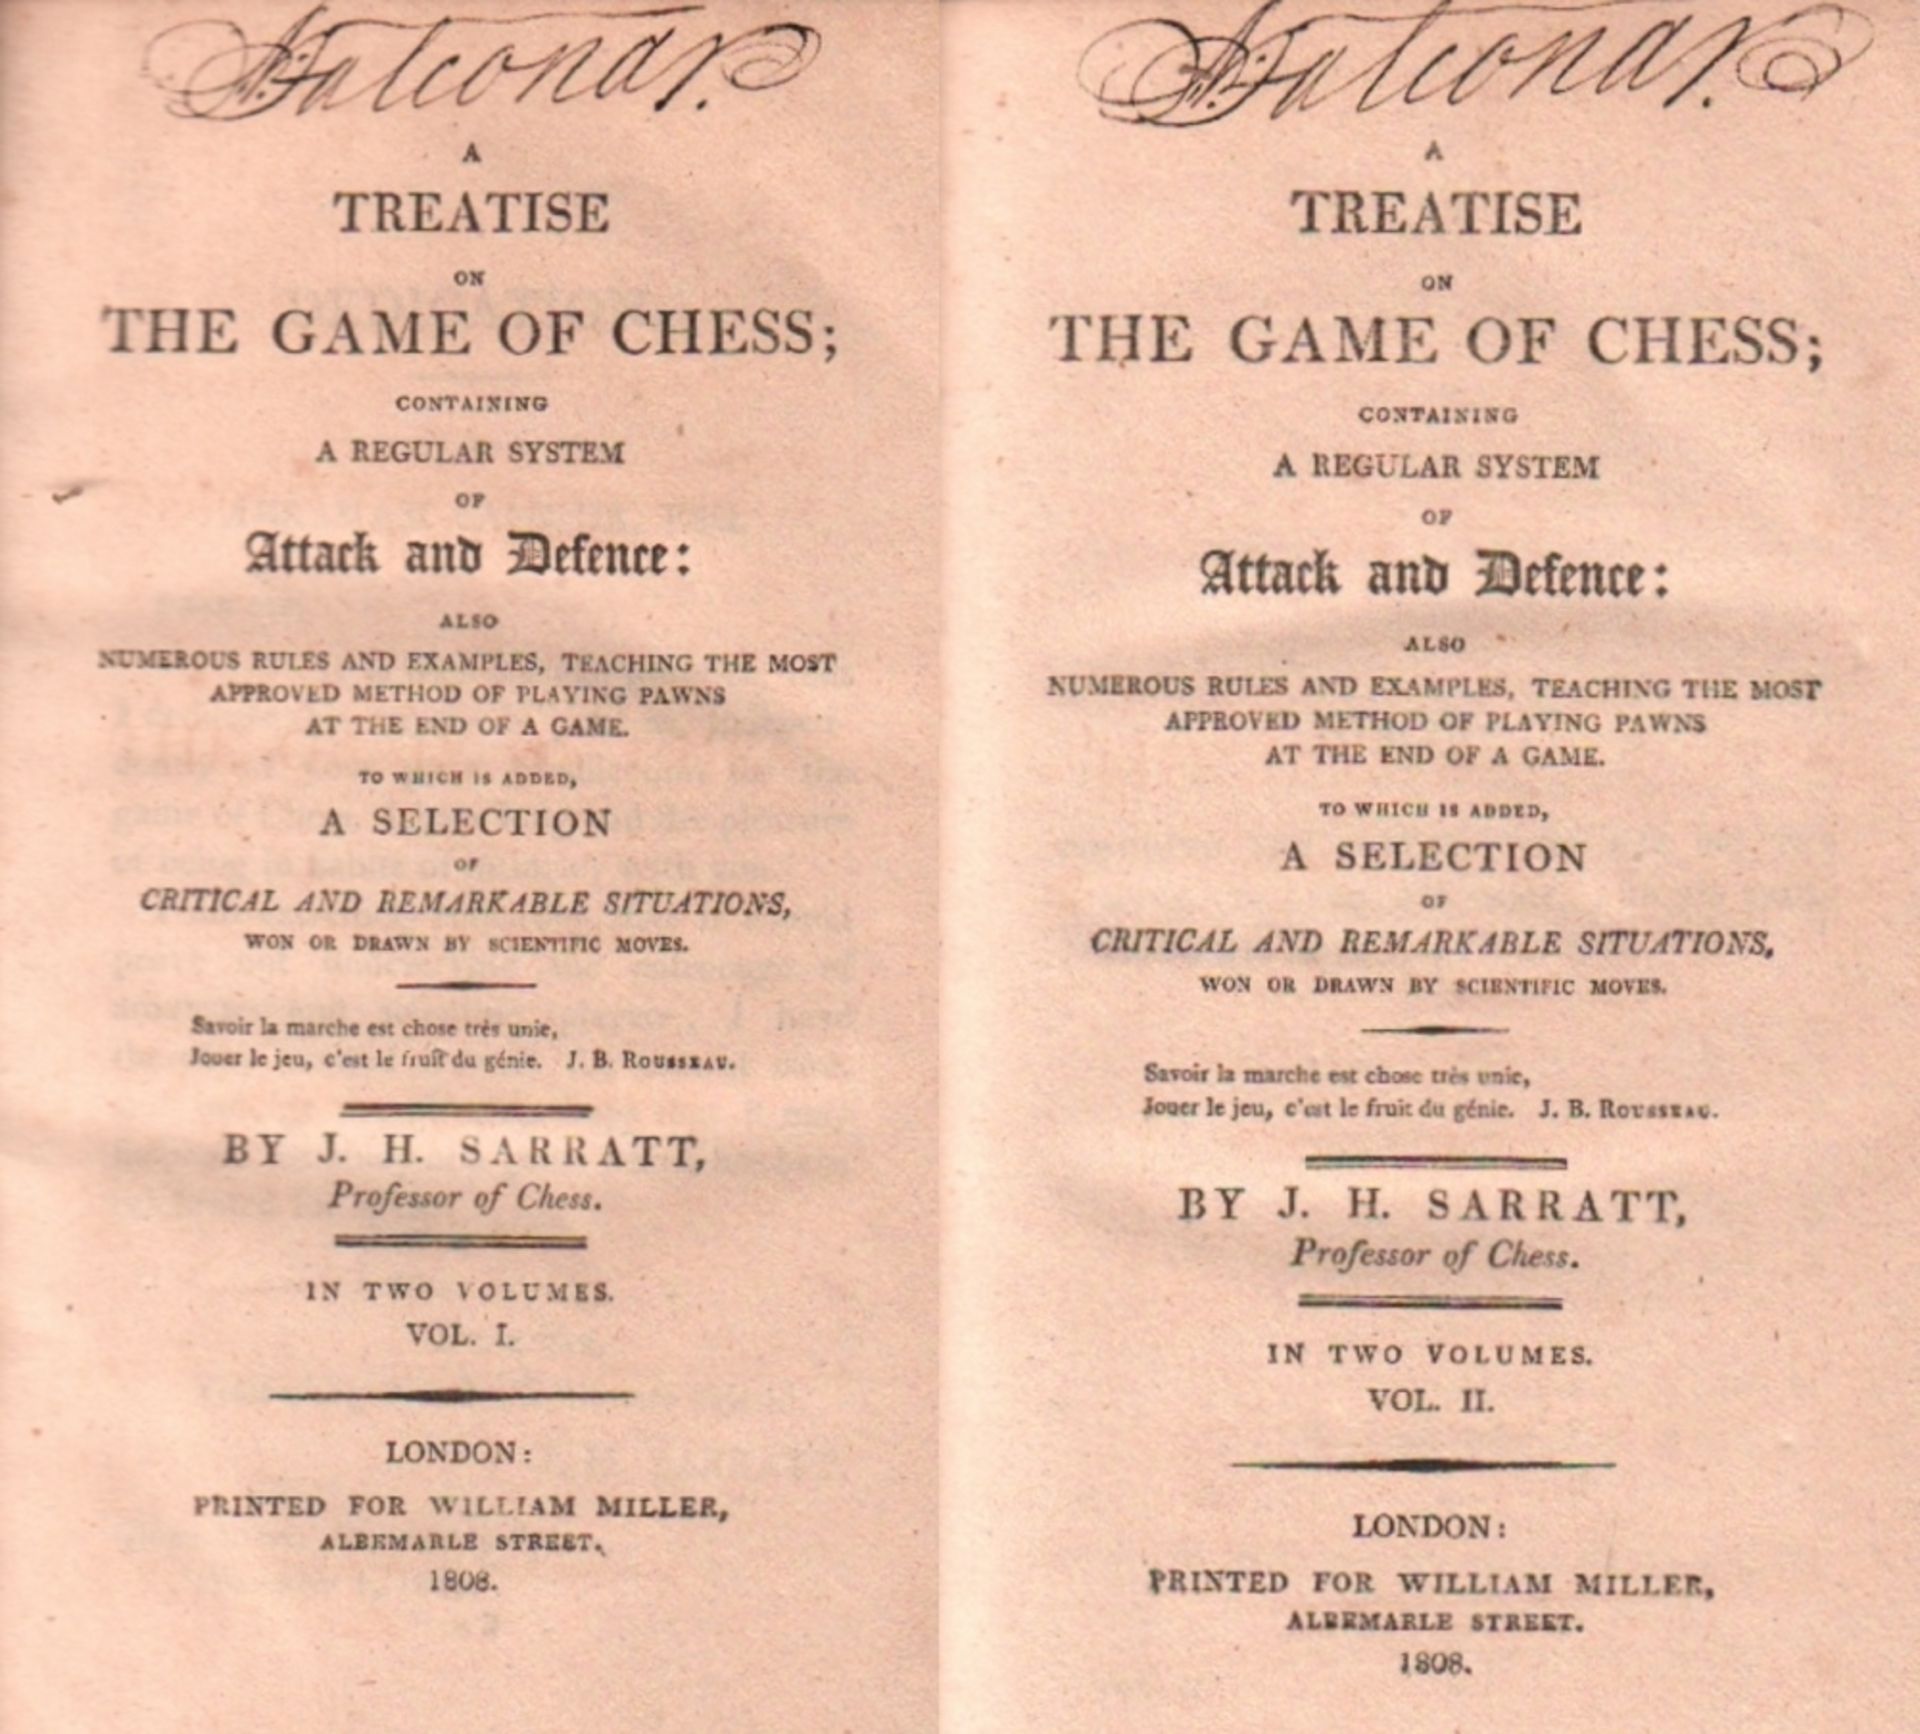 Sarratt, J. H. A treatise on the game of chess; containing a regular system of attack and defence: